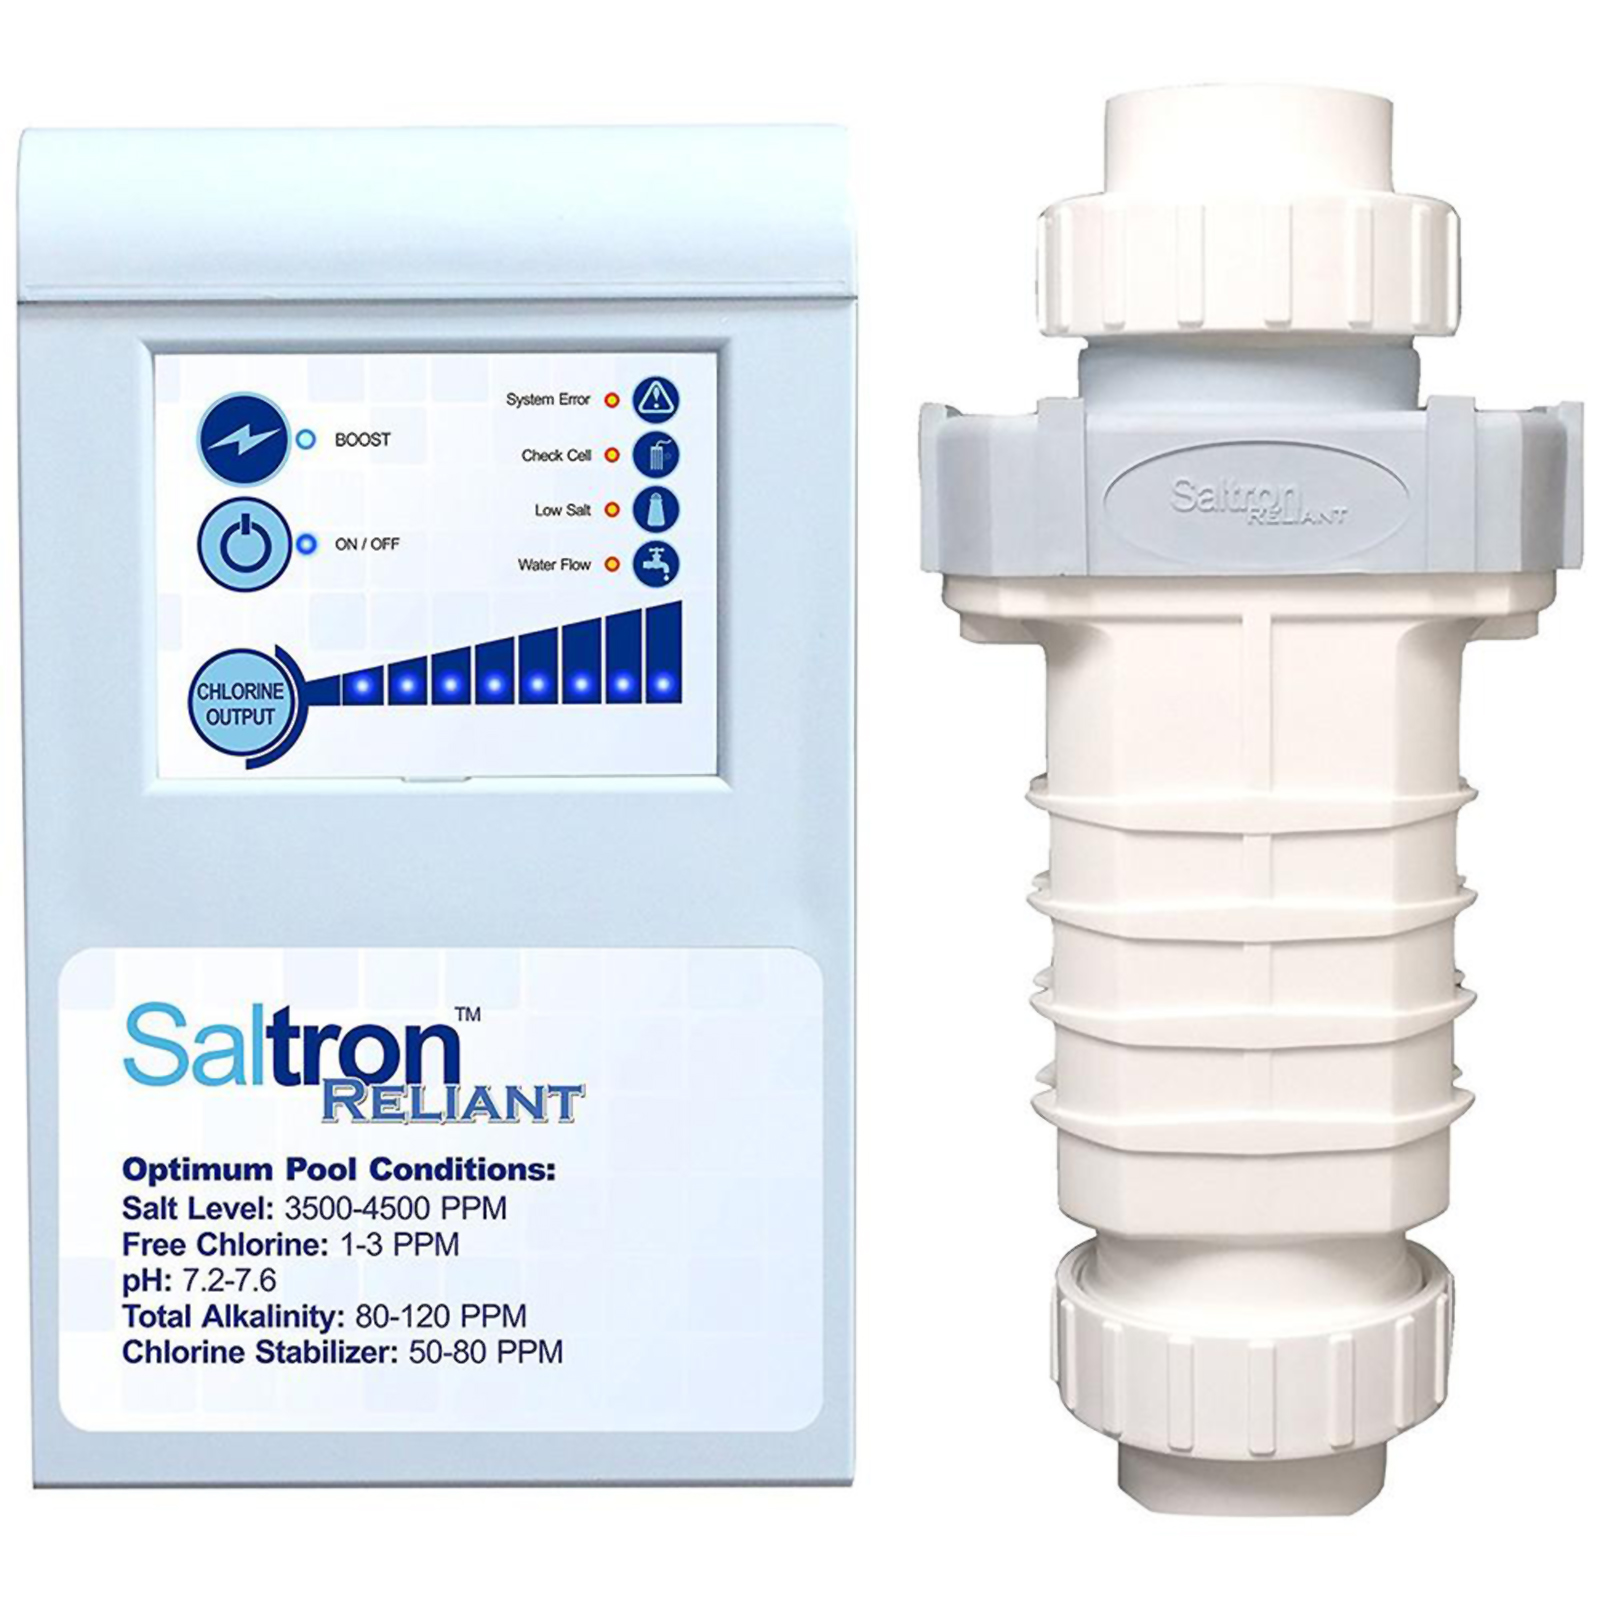 Solaxx Saltron Reliant Salt Chlorine Generator for Up To 25,000gal Pools